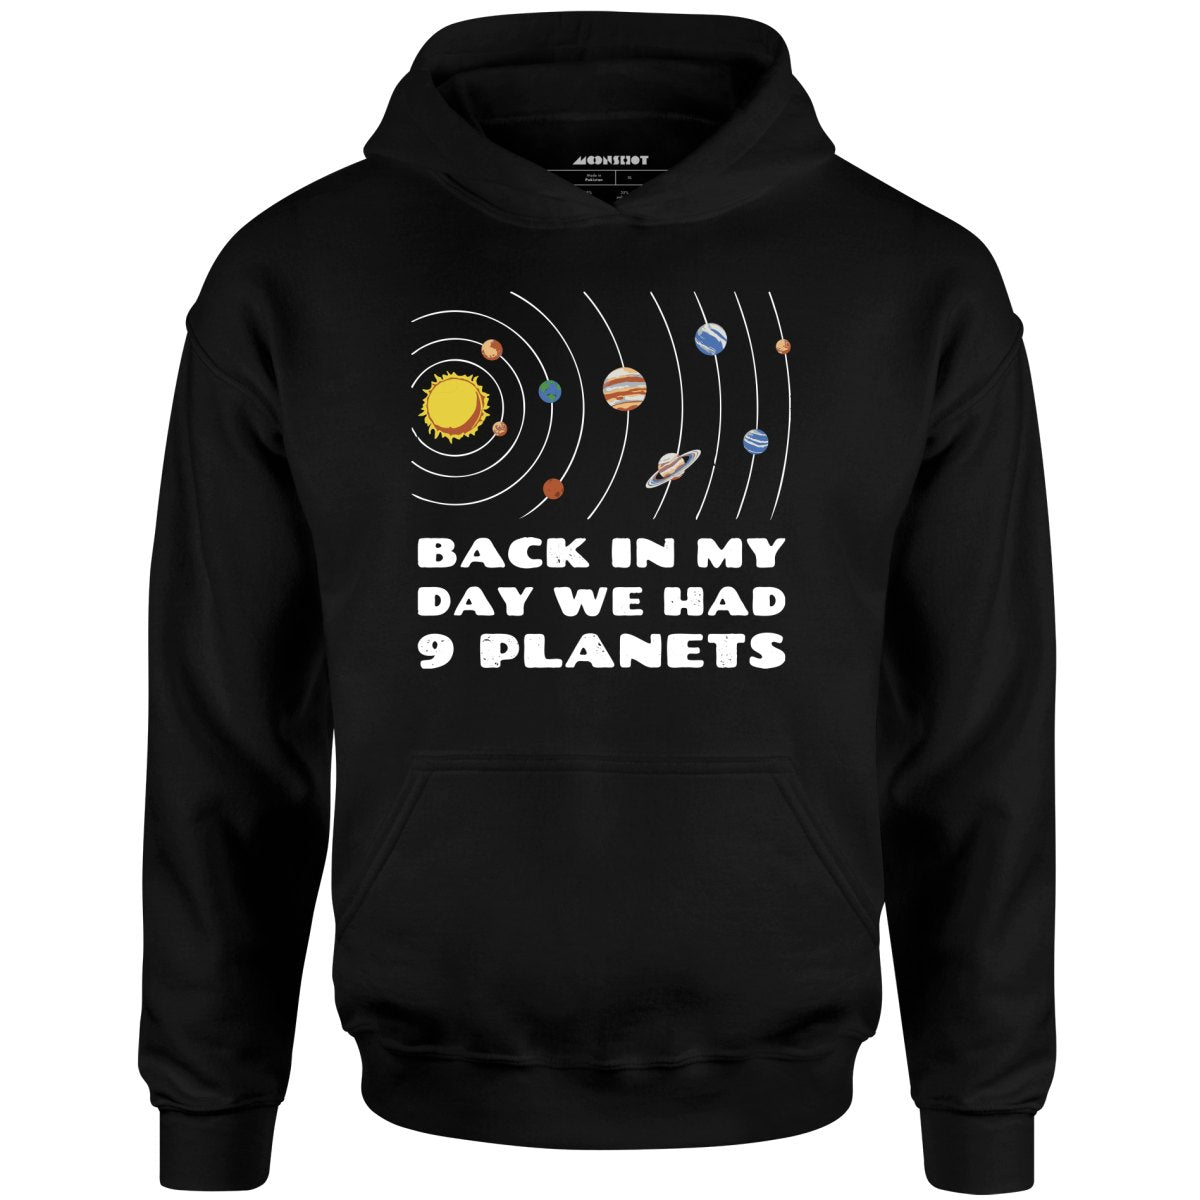 Back in My Day We Had 9 Planets - Unisex Hoodie